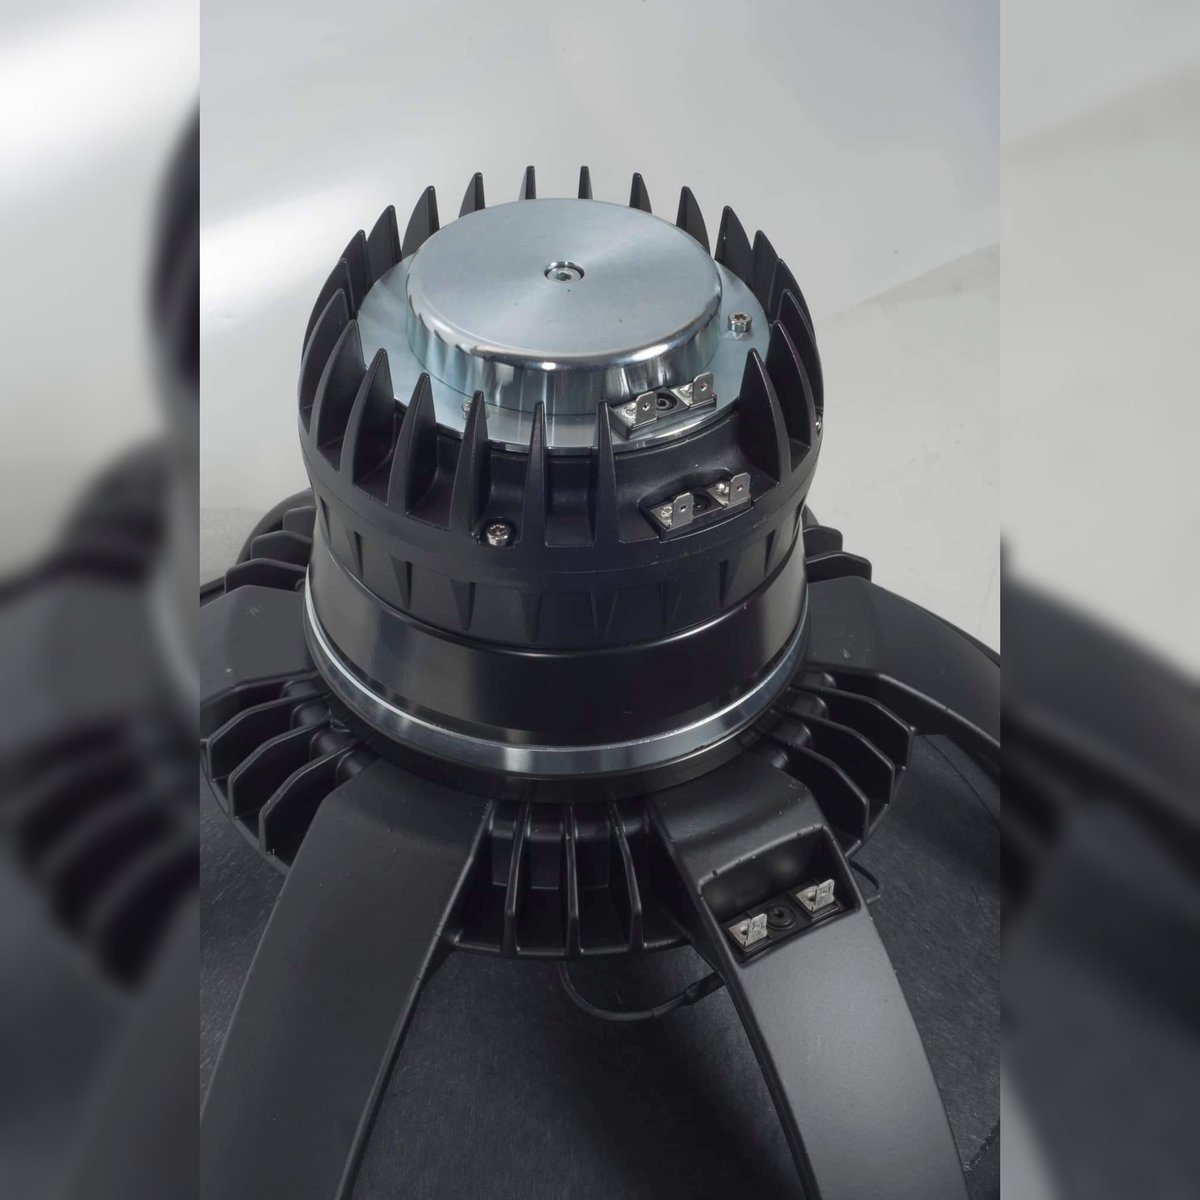 😮👀🤔🔊🎵 Introducing  the 18HTX100 by #BCspeakers! It is defined as a triaxial driver. 
Find out more here
bit.ly/3izkUs6

🛒Shop #caraudio - bit.ly/3z0KDgO

#12voltmag #prvaudio #12volt #caraudioaddicts #subwoofers